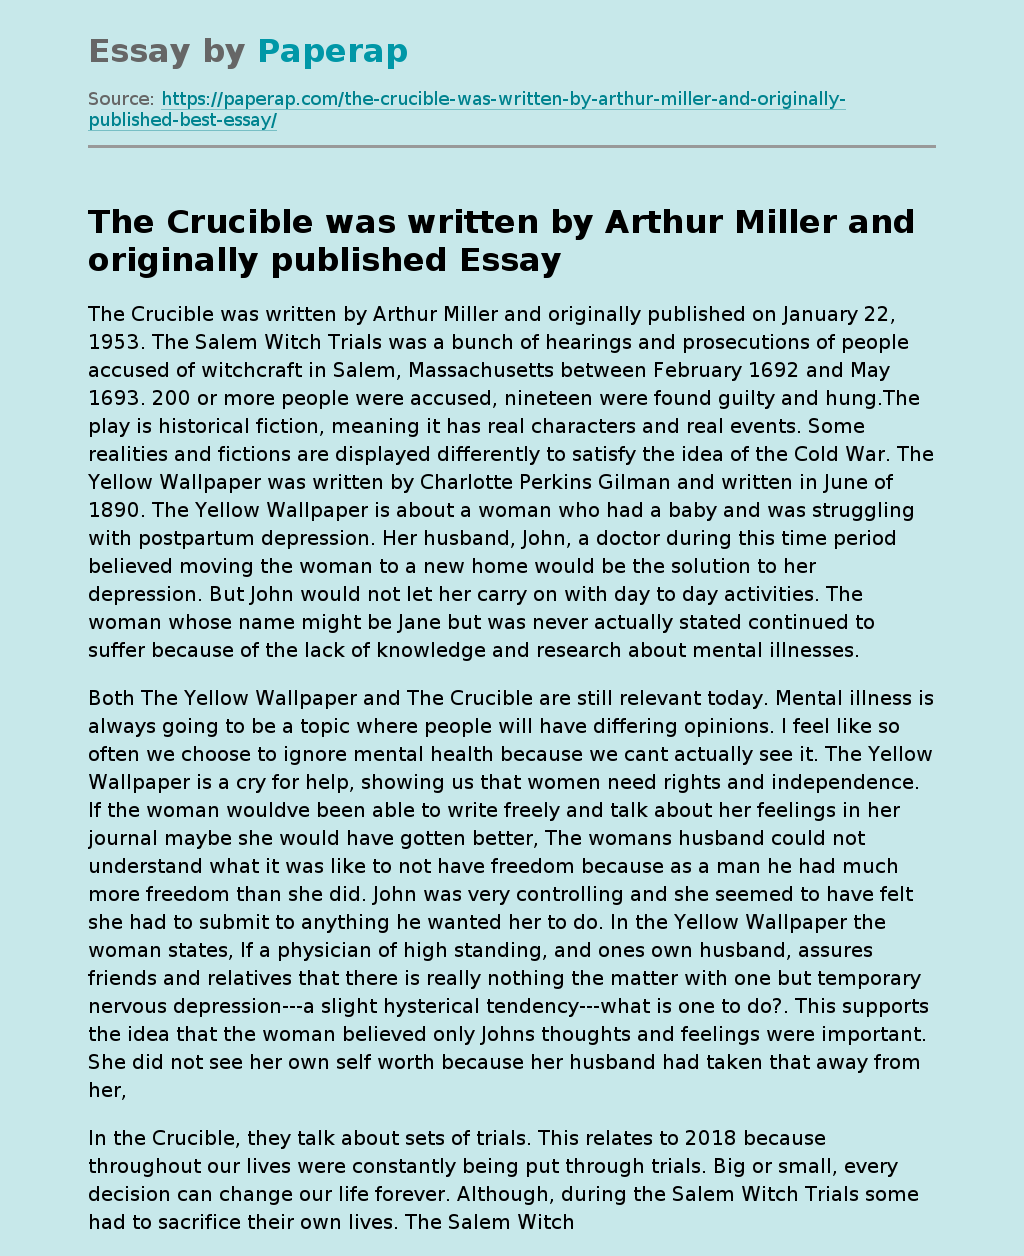 The Crucible was written by Arthur Miller and originally published